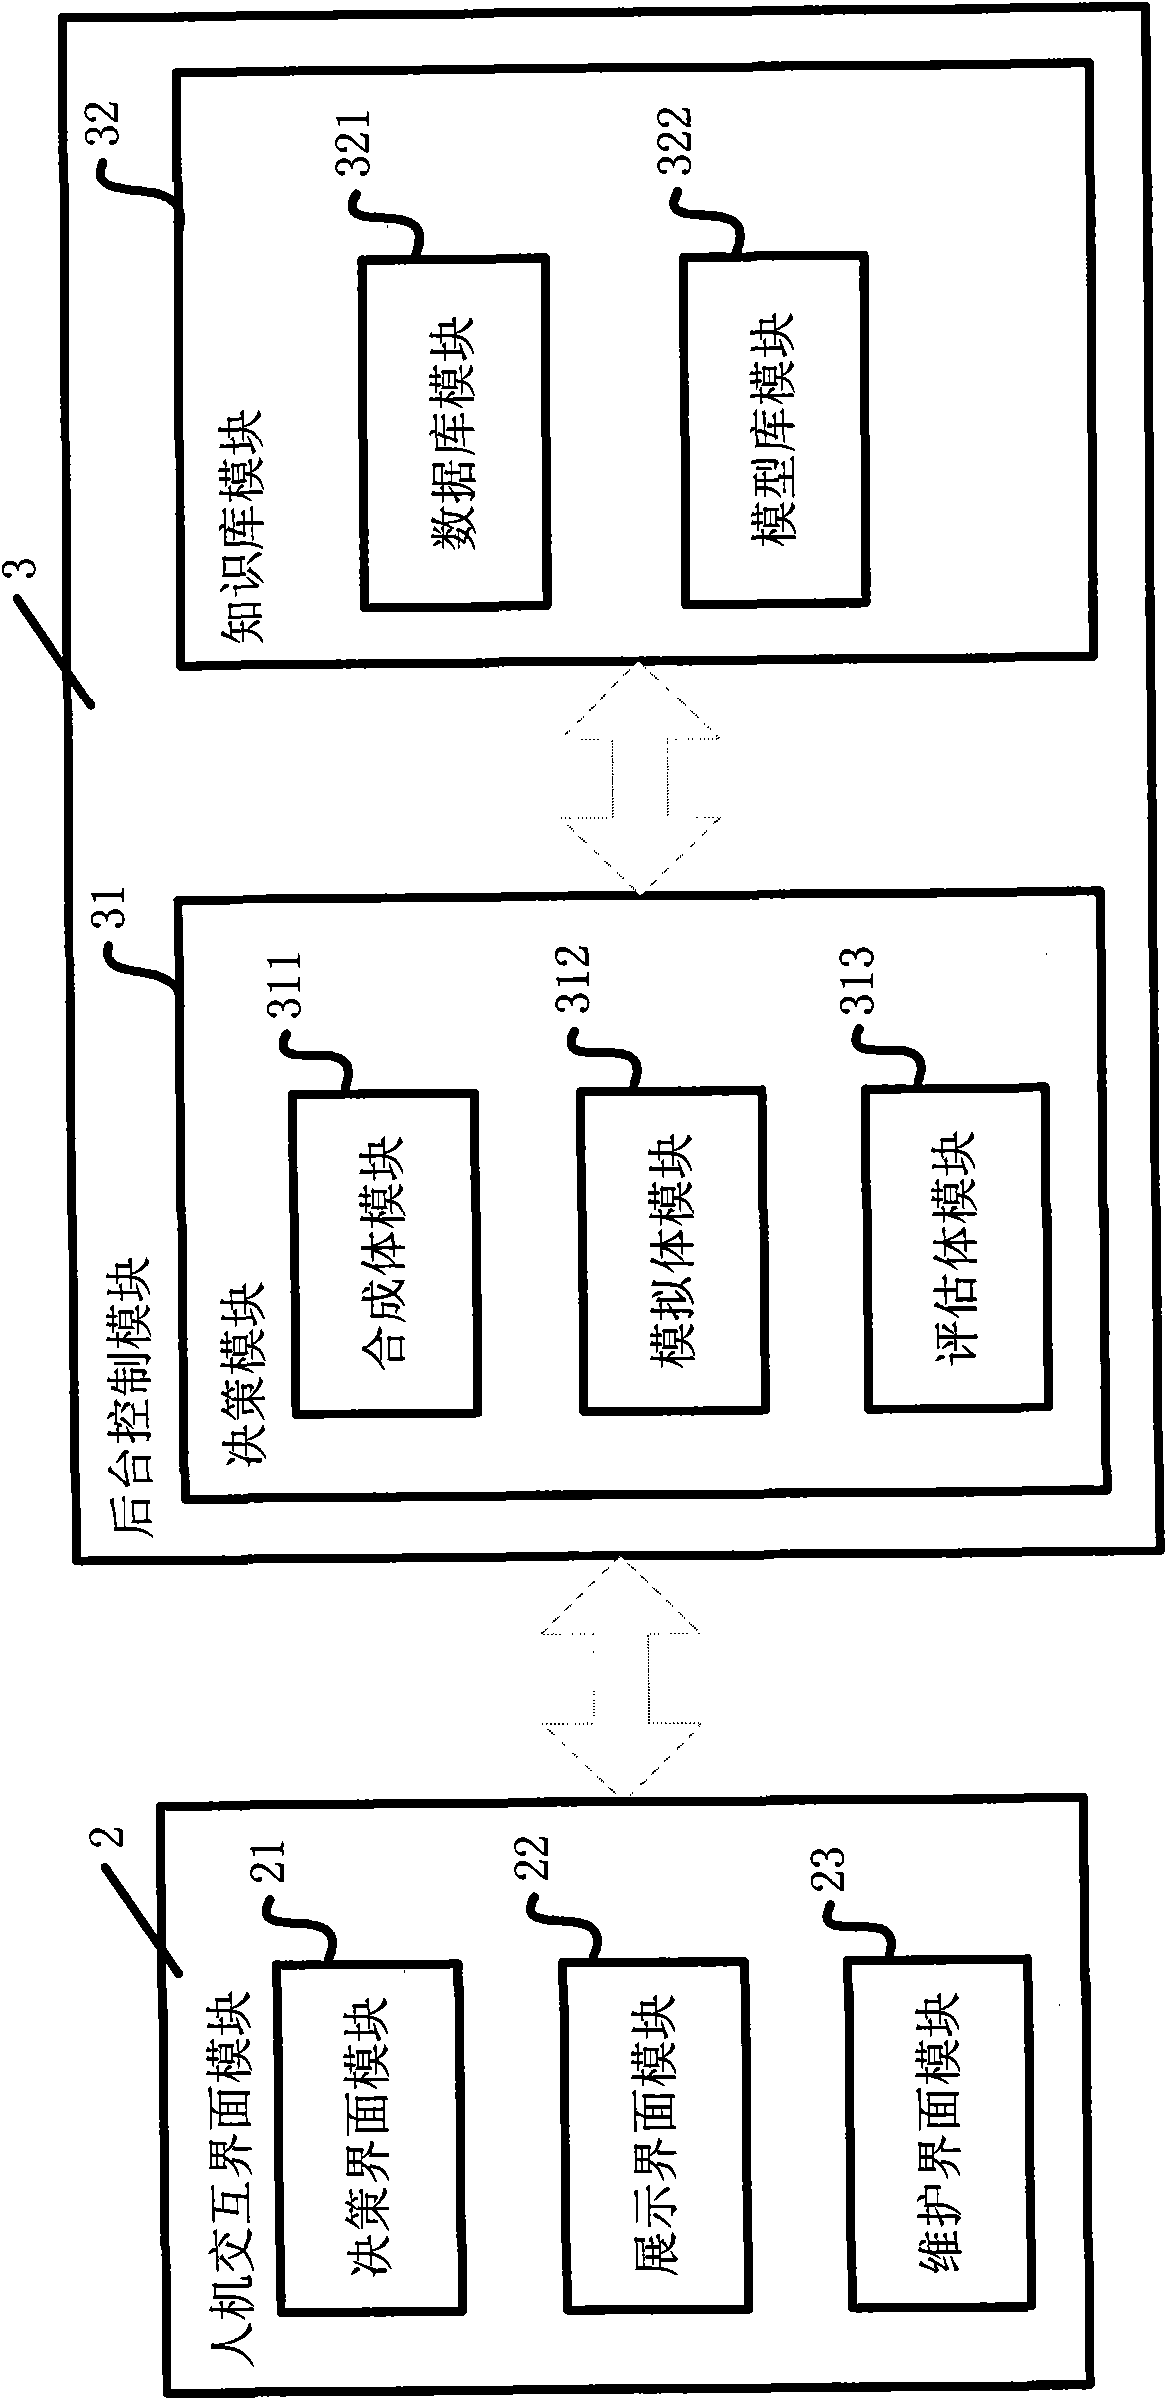 Decision support system for managing ecological construction